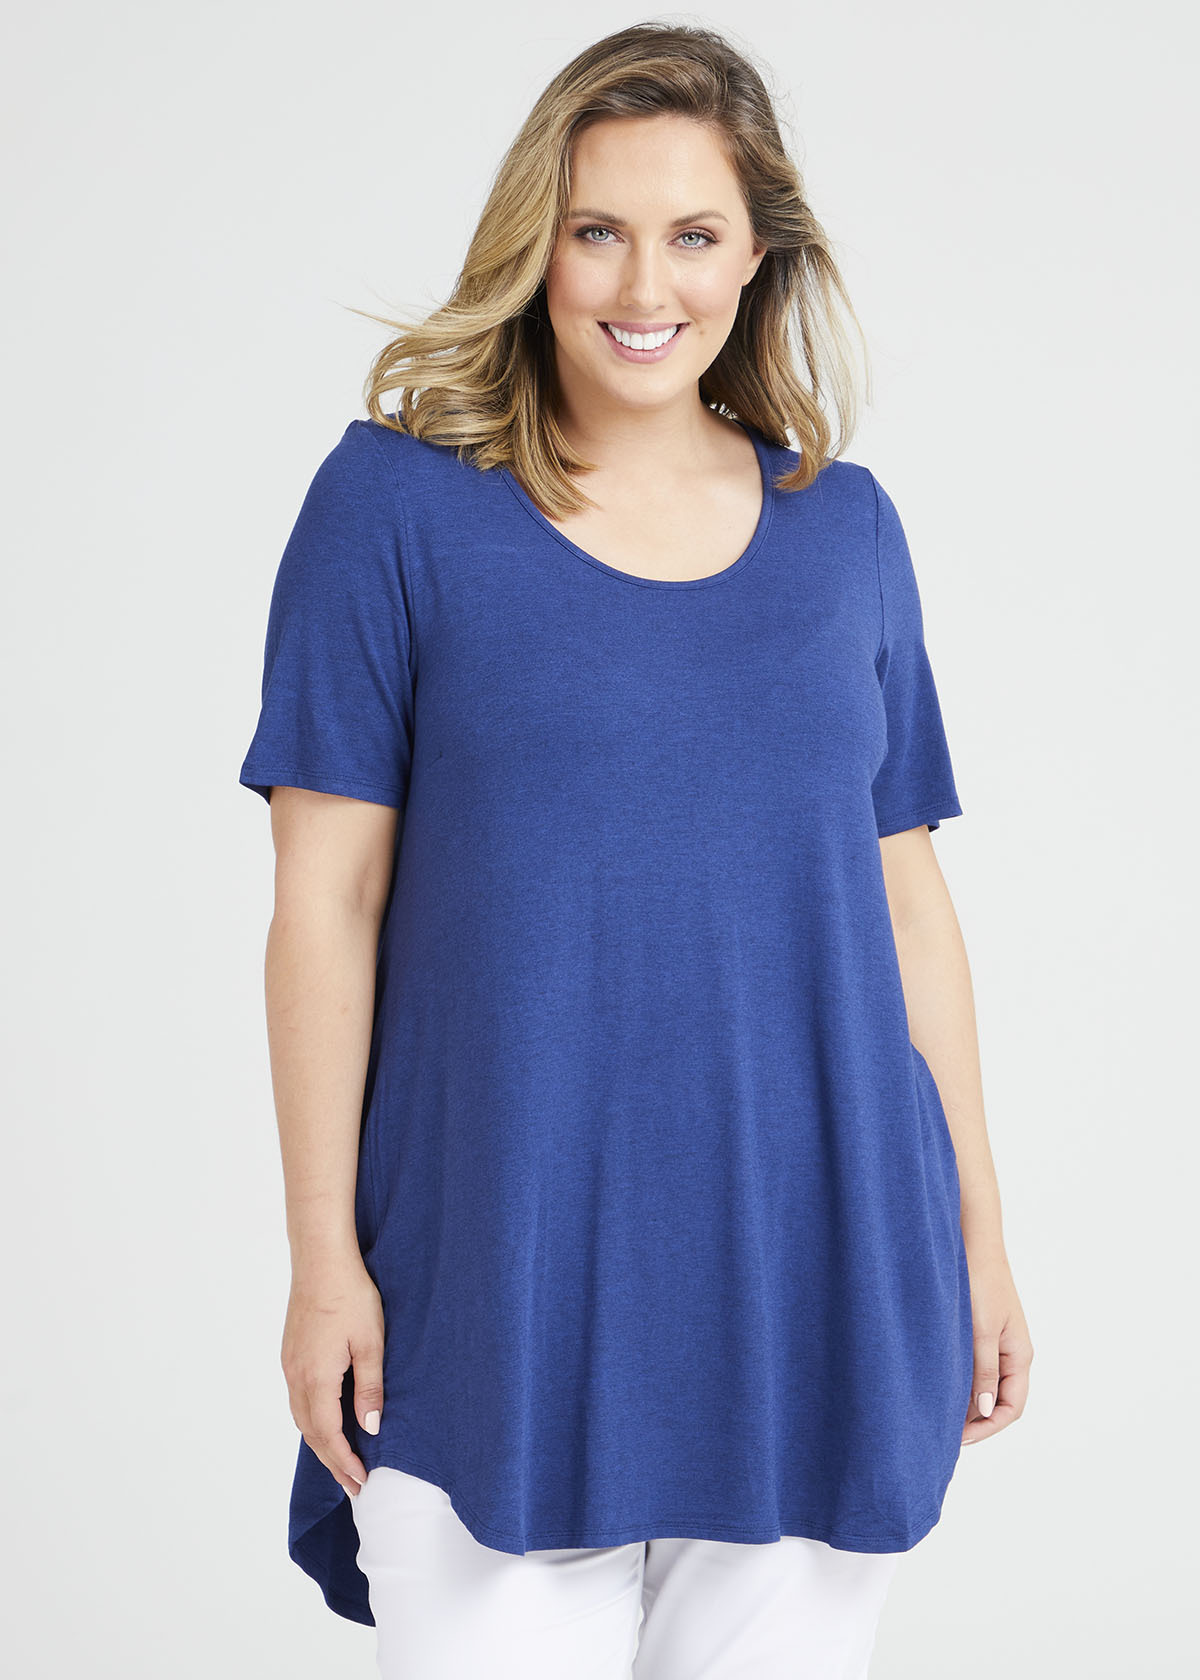 Bamboo Base Short Sleeve Top in Blue, Sizes 12-30 | Taking Shape NZ